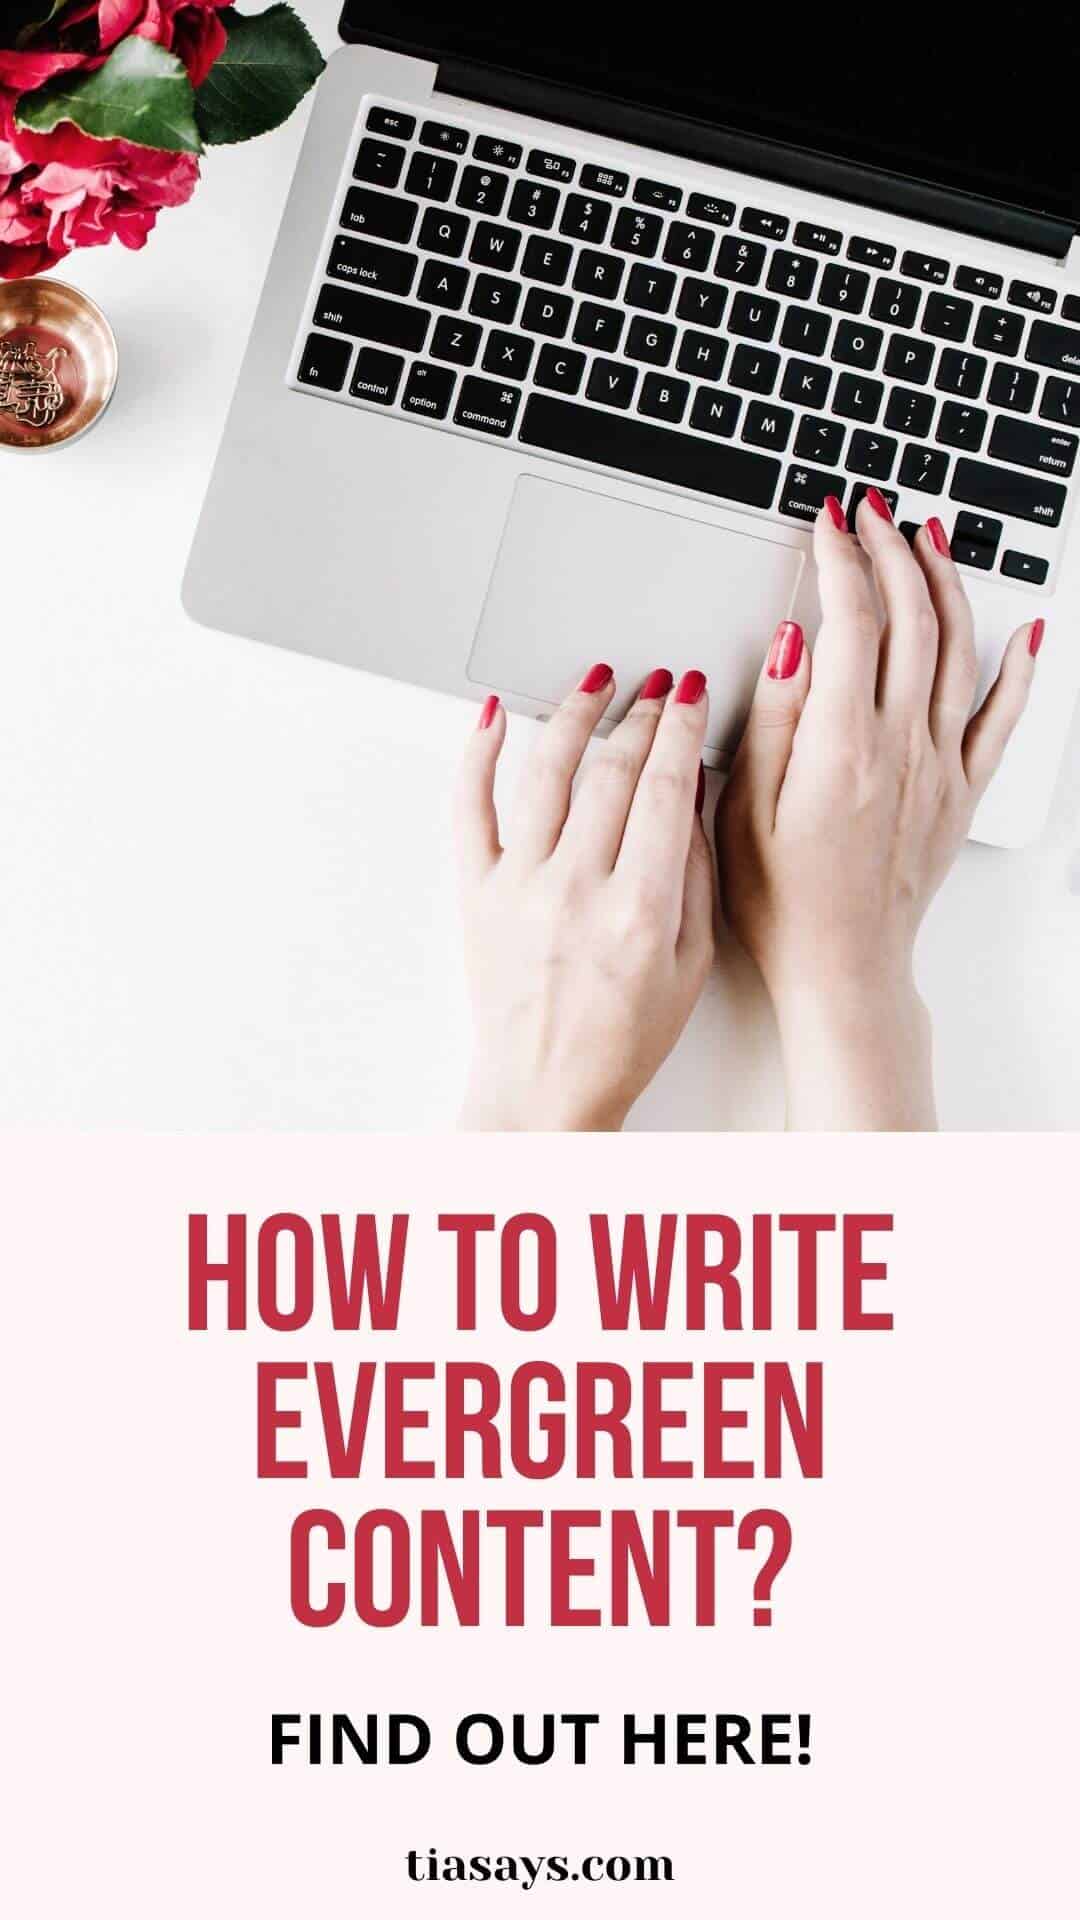 evergreen content definition and how to write it